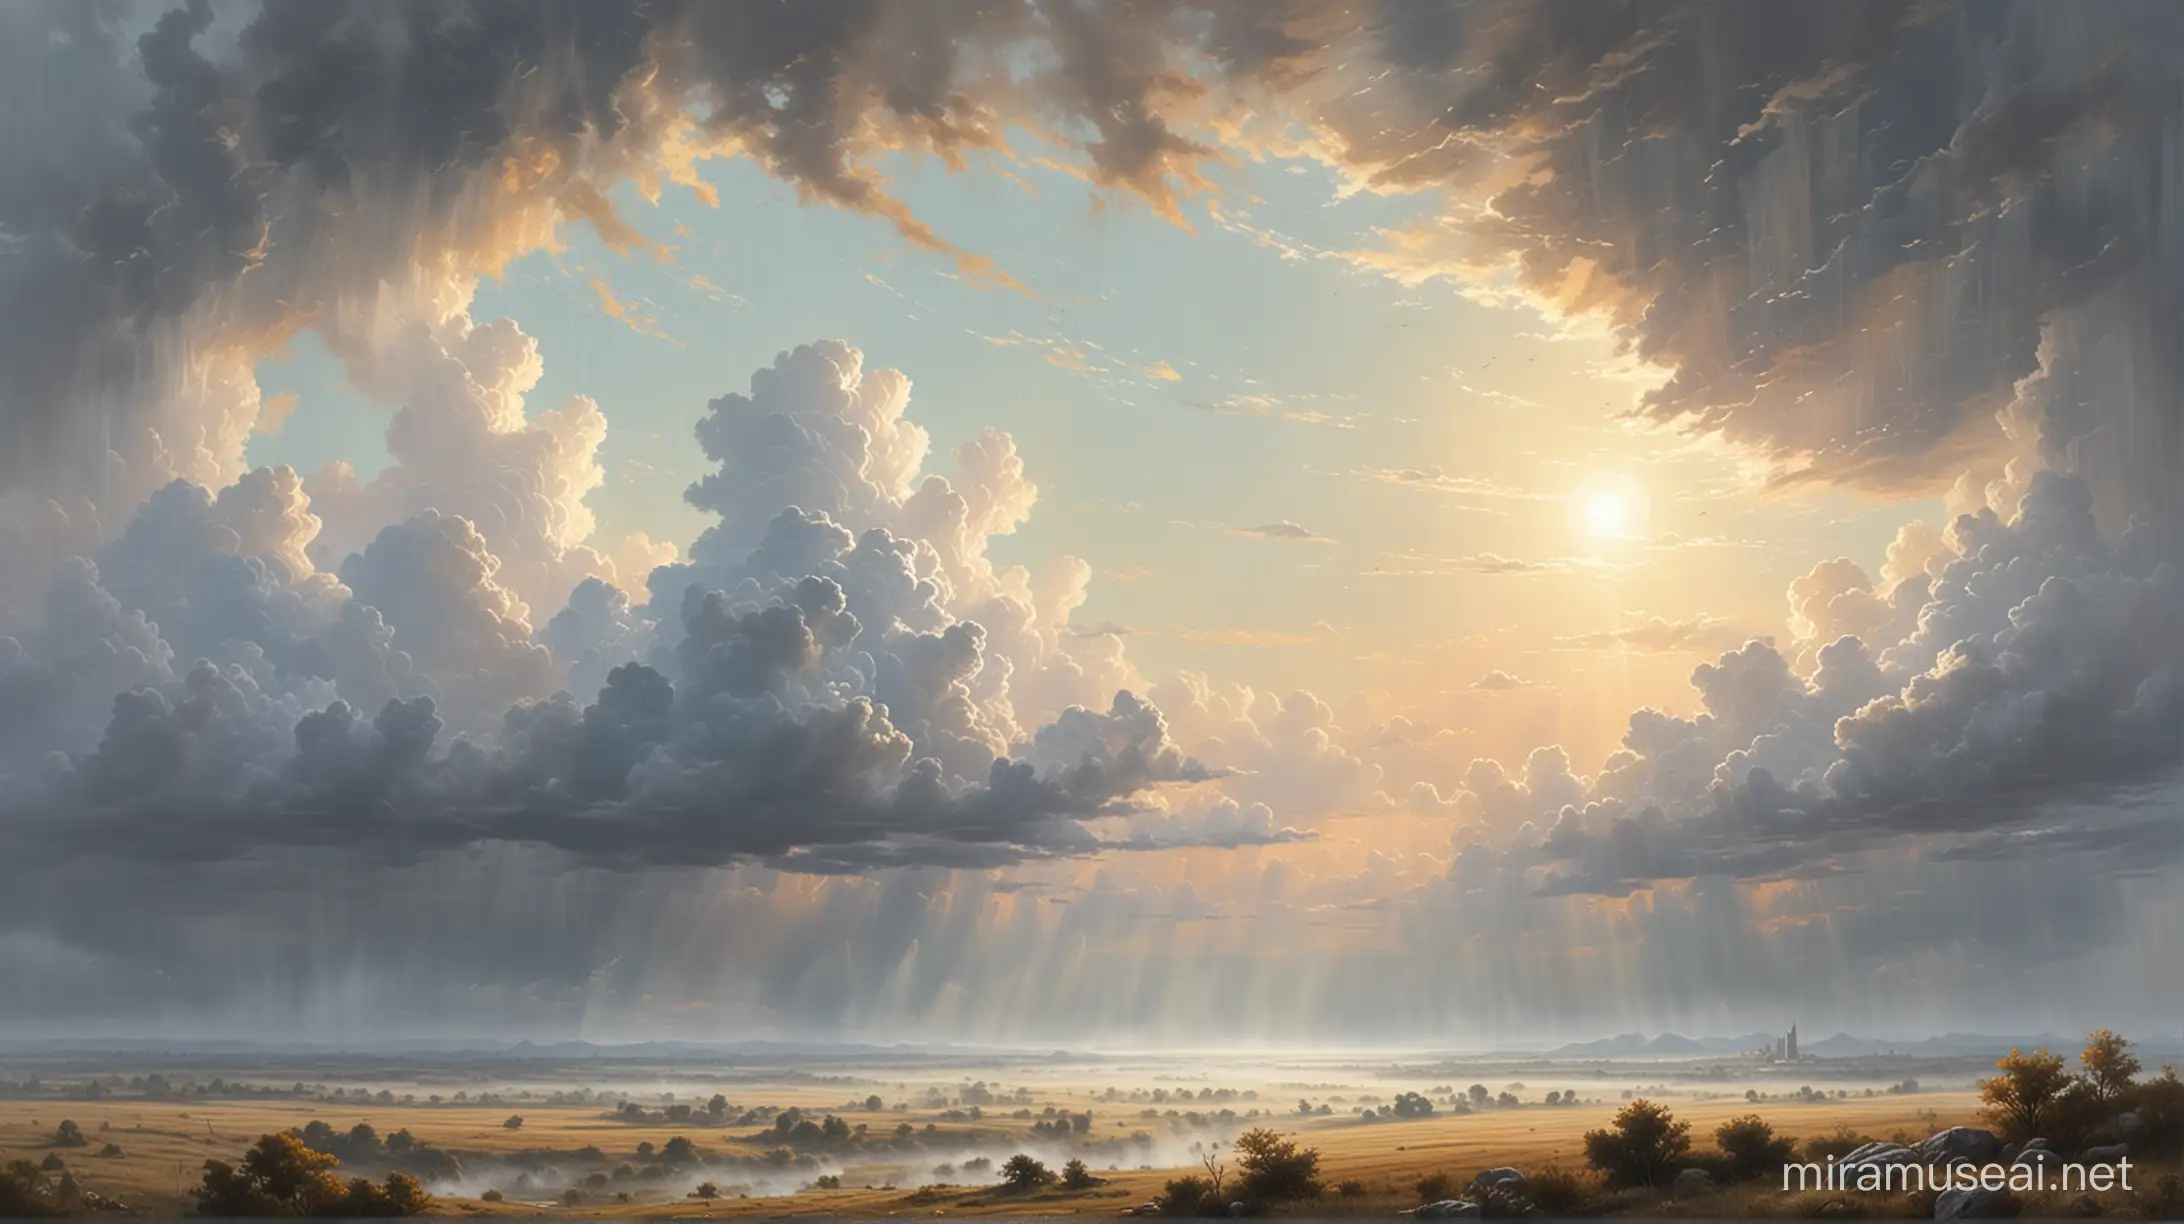 Detailed Painting of Foggy Sky with Sunlight Shafts